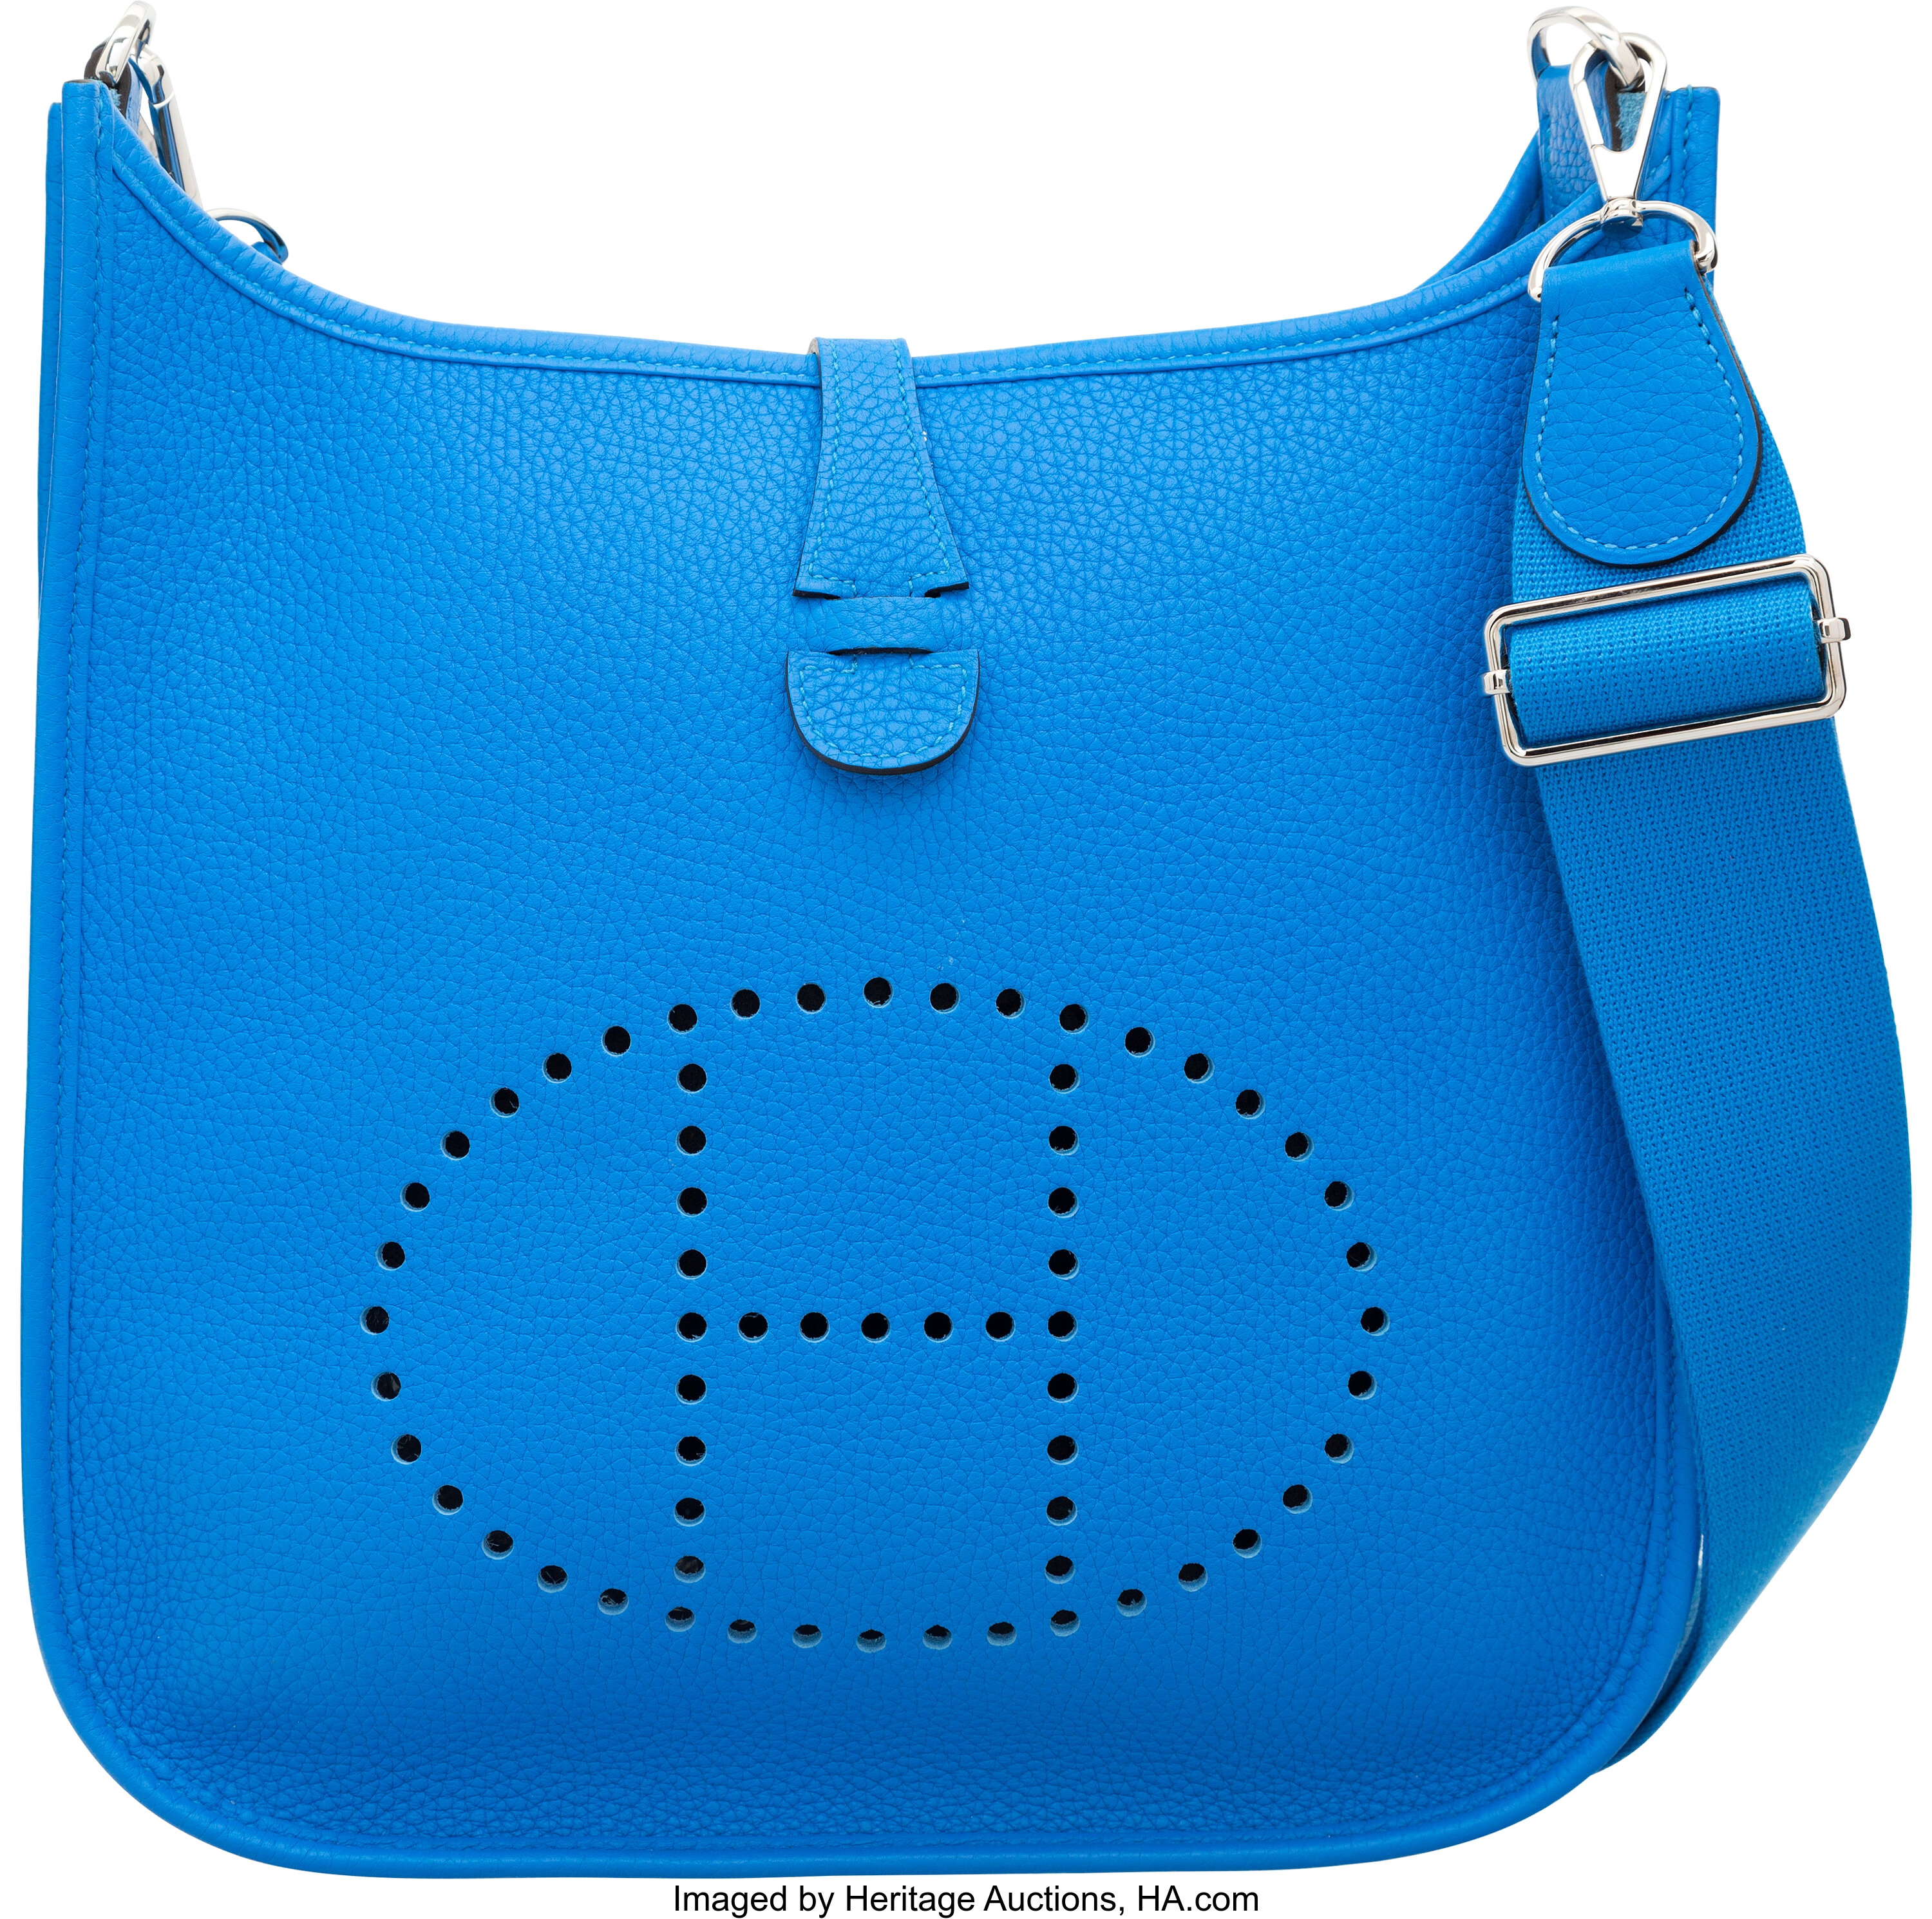 Hermes Blue Hydra Clemence Leather Evelyne III PM Bag with